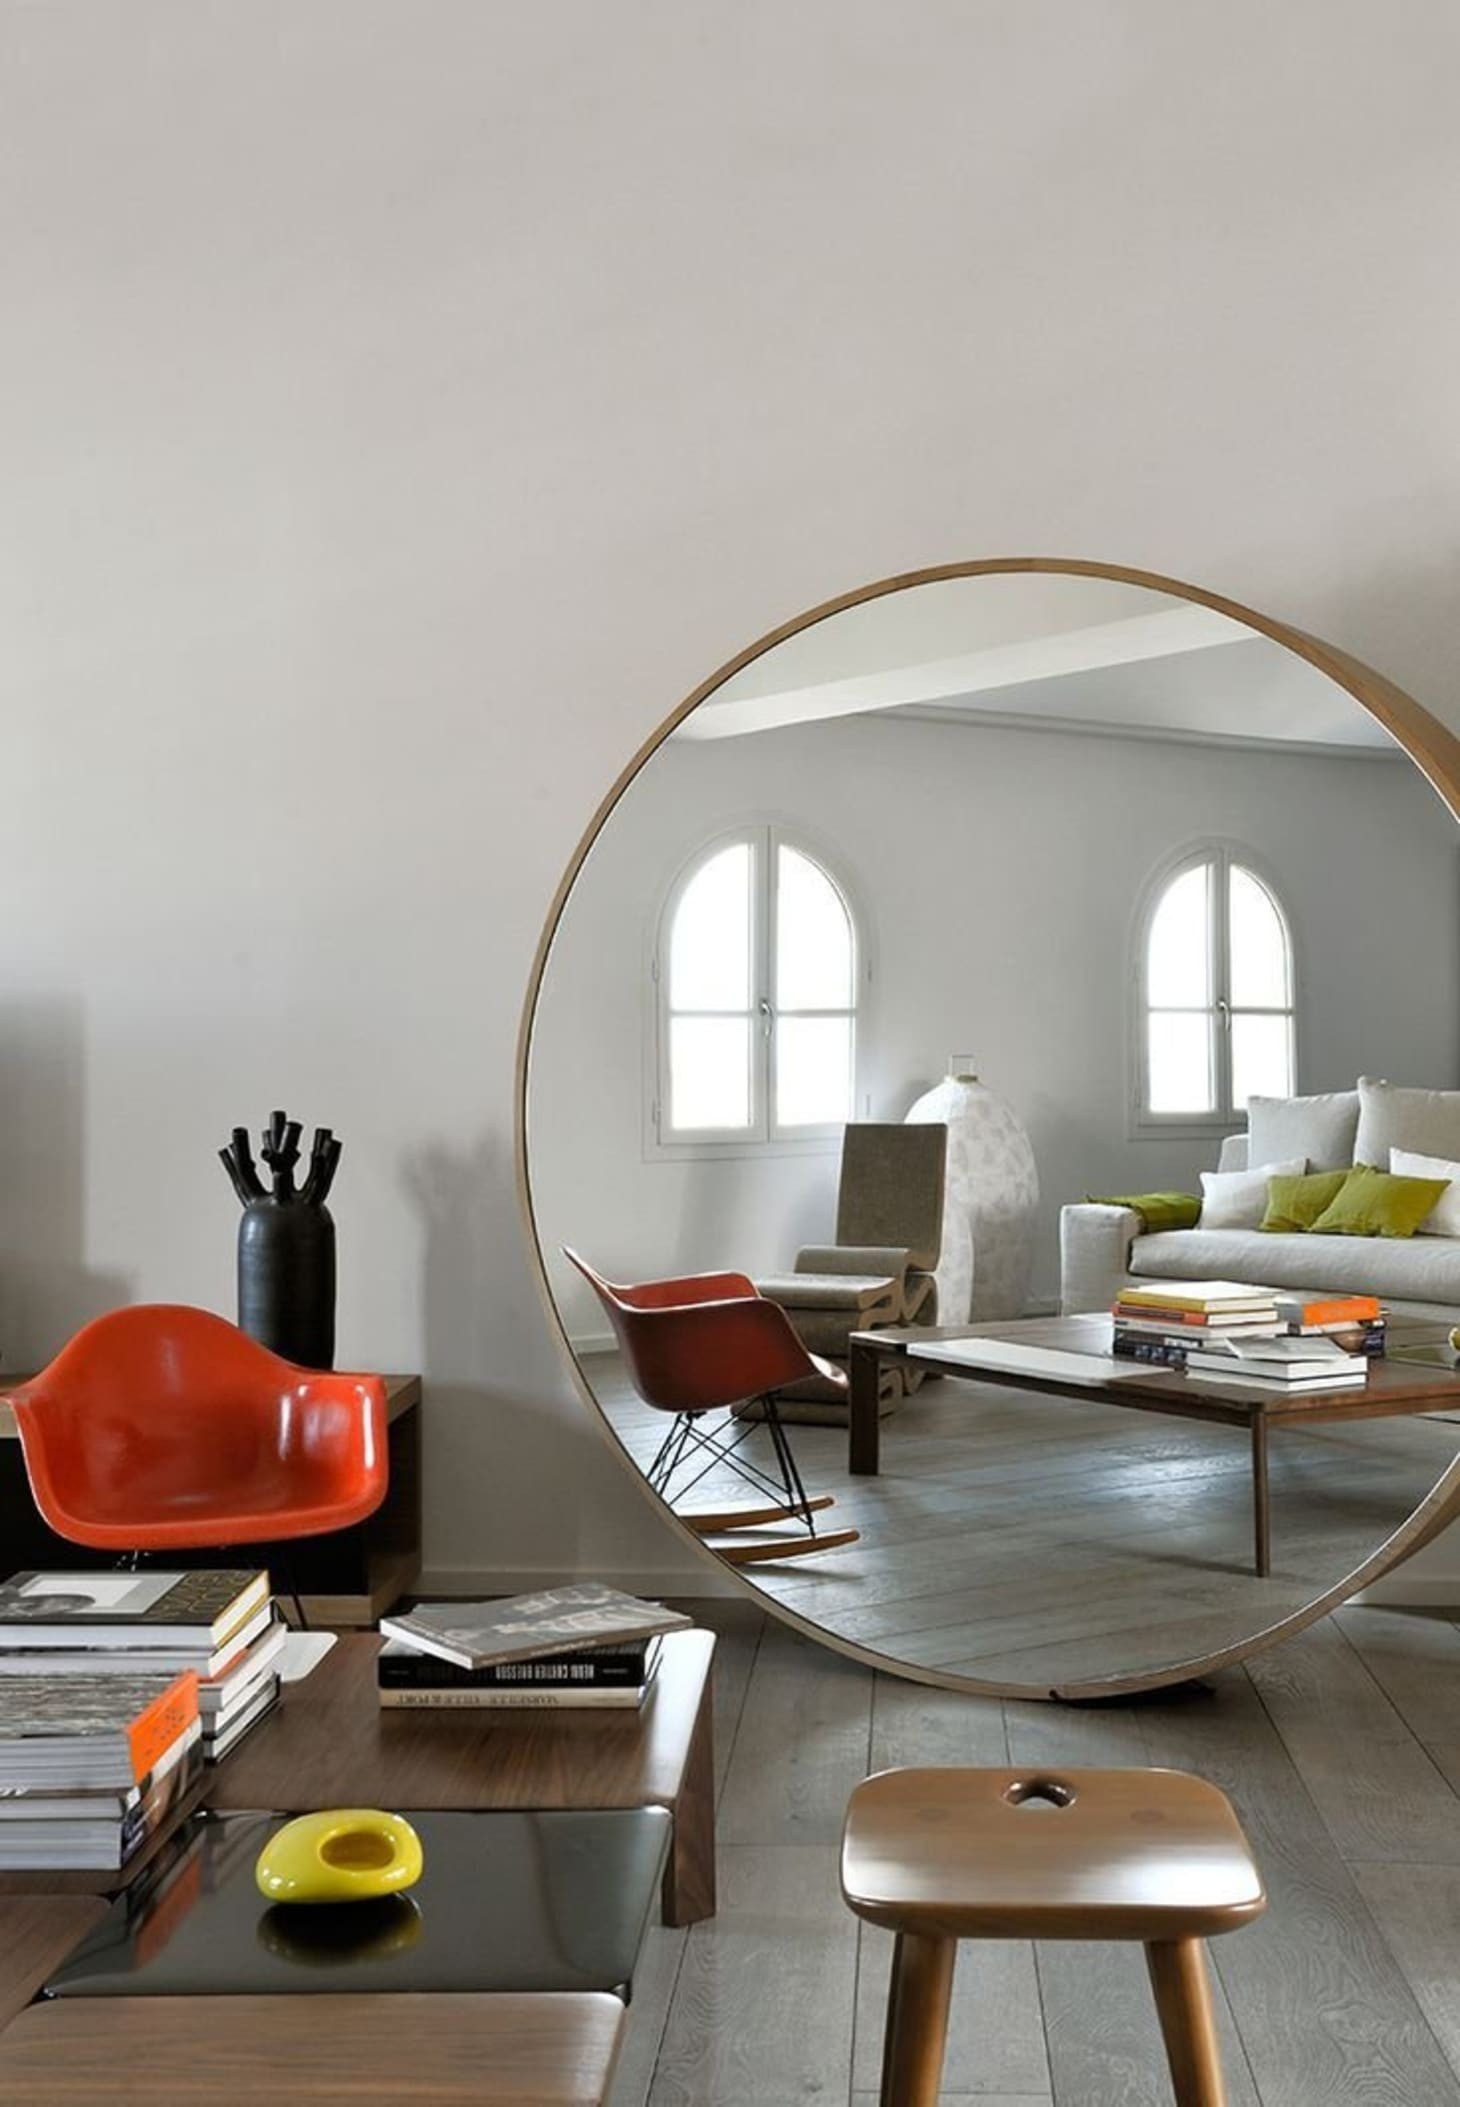 How to decorate a round mirror